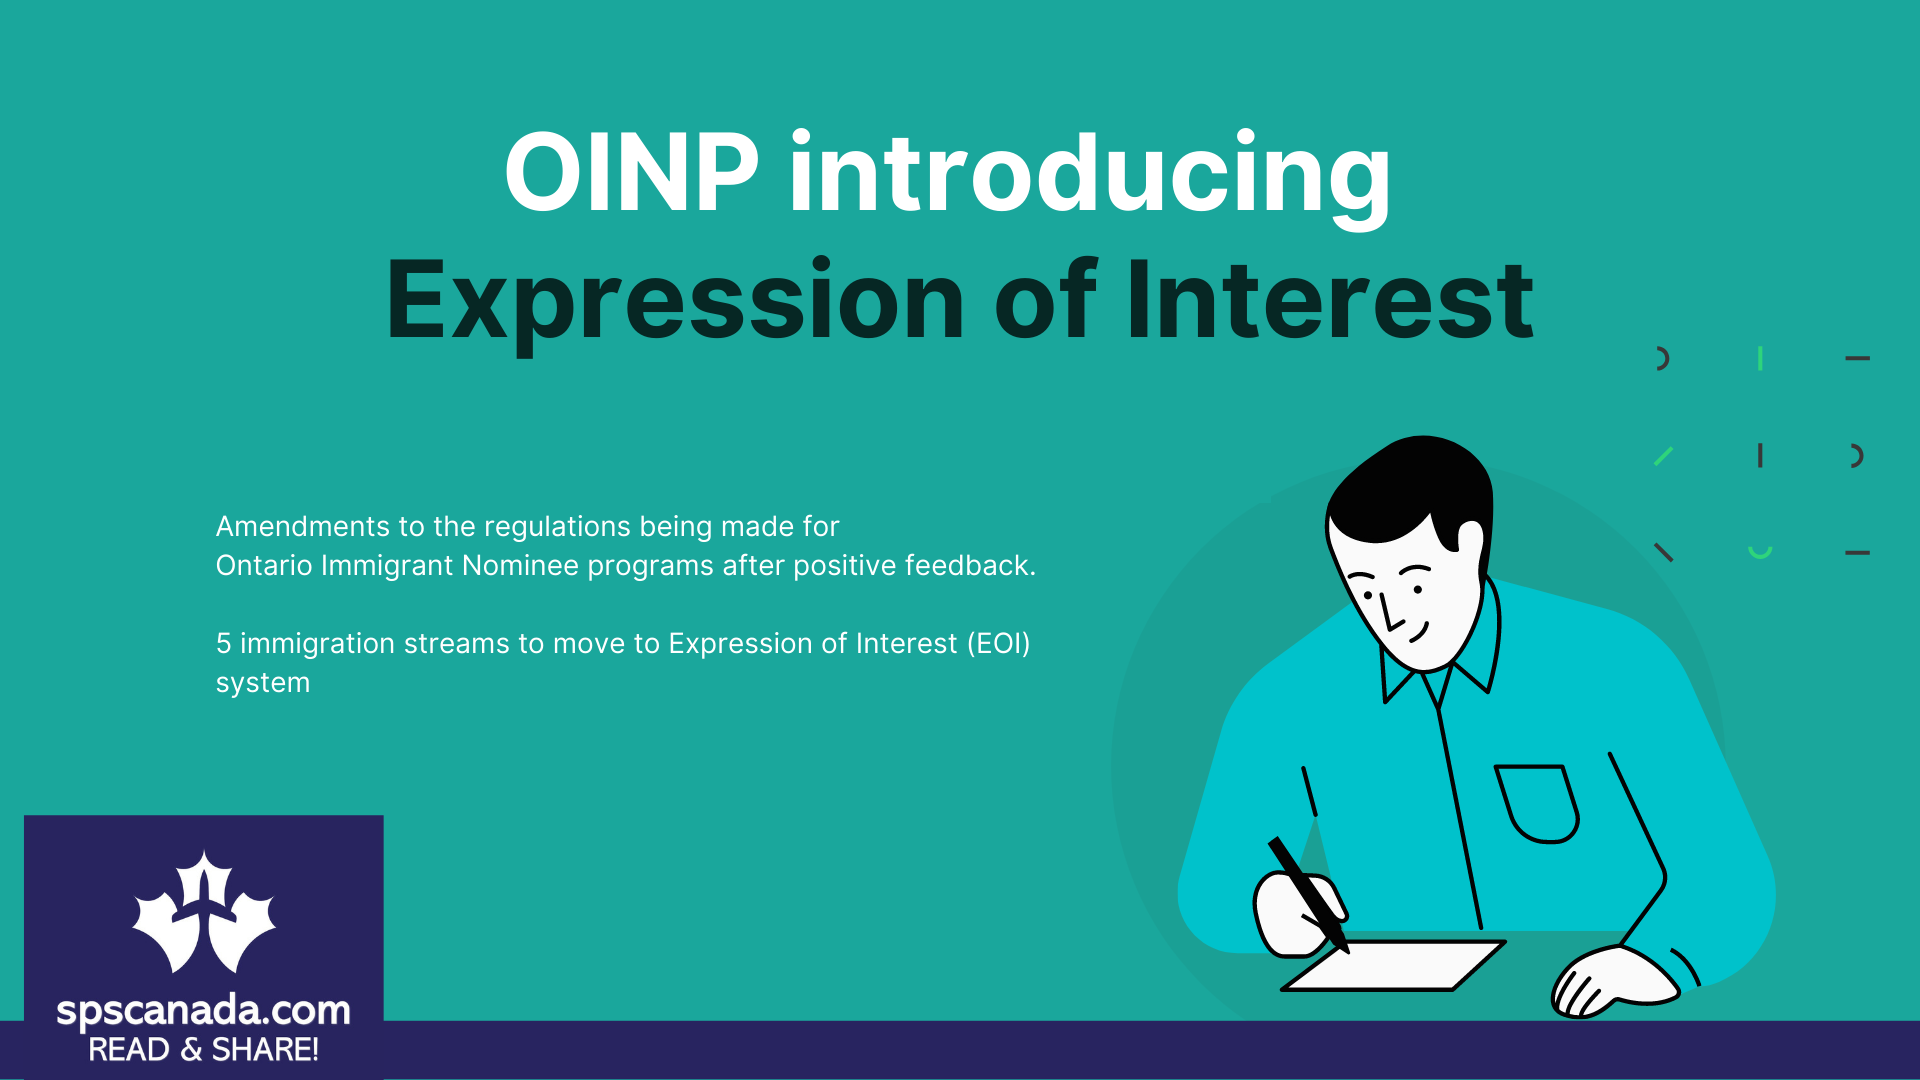 OINP introducing Expression of Interest, bringing changes to its Traditional System